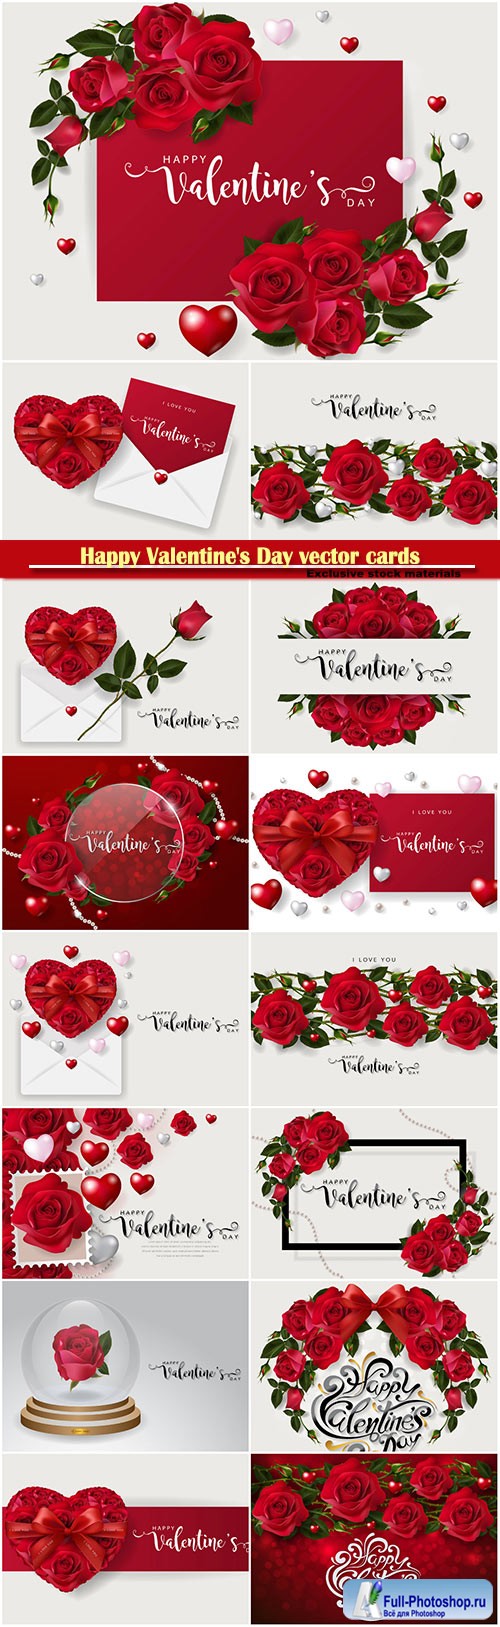 Happy Valentine's Day vector cards, red roses and hearts, romantic backgrounds # 2